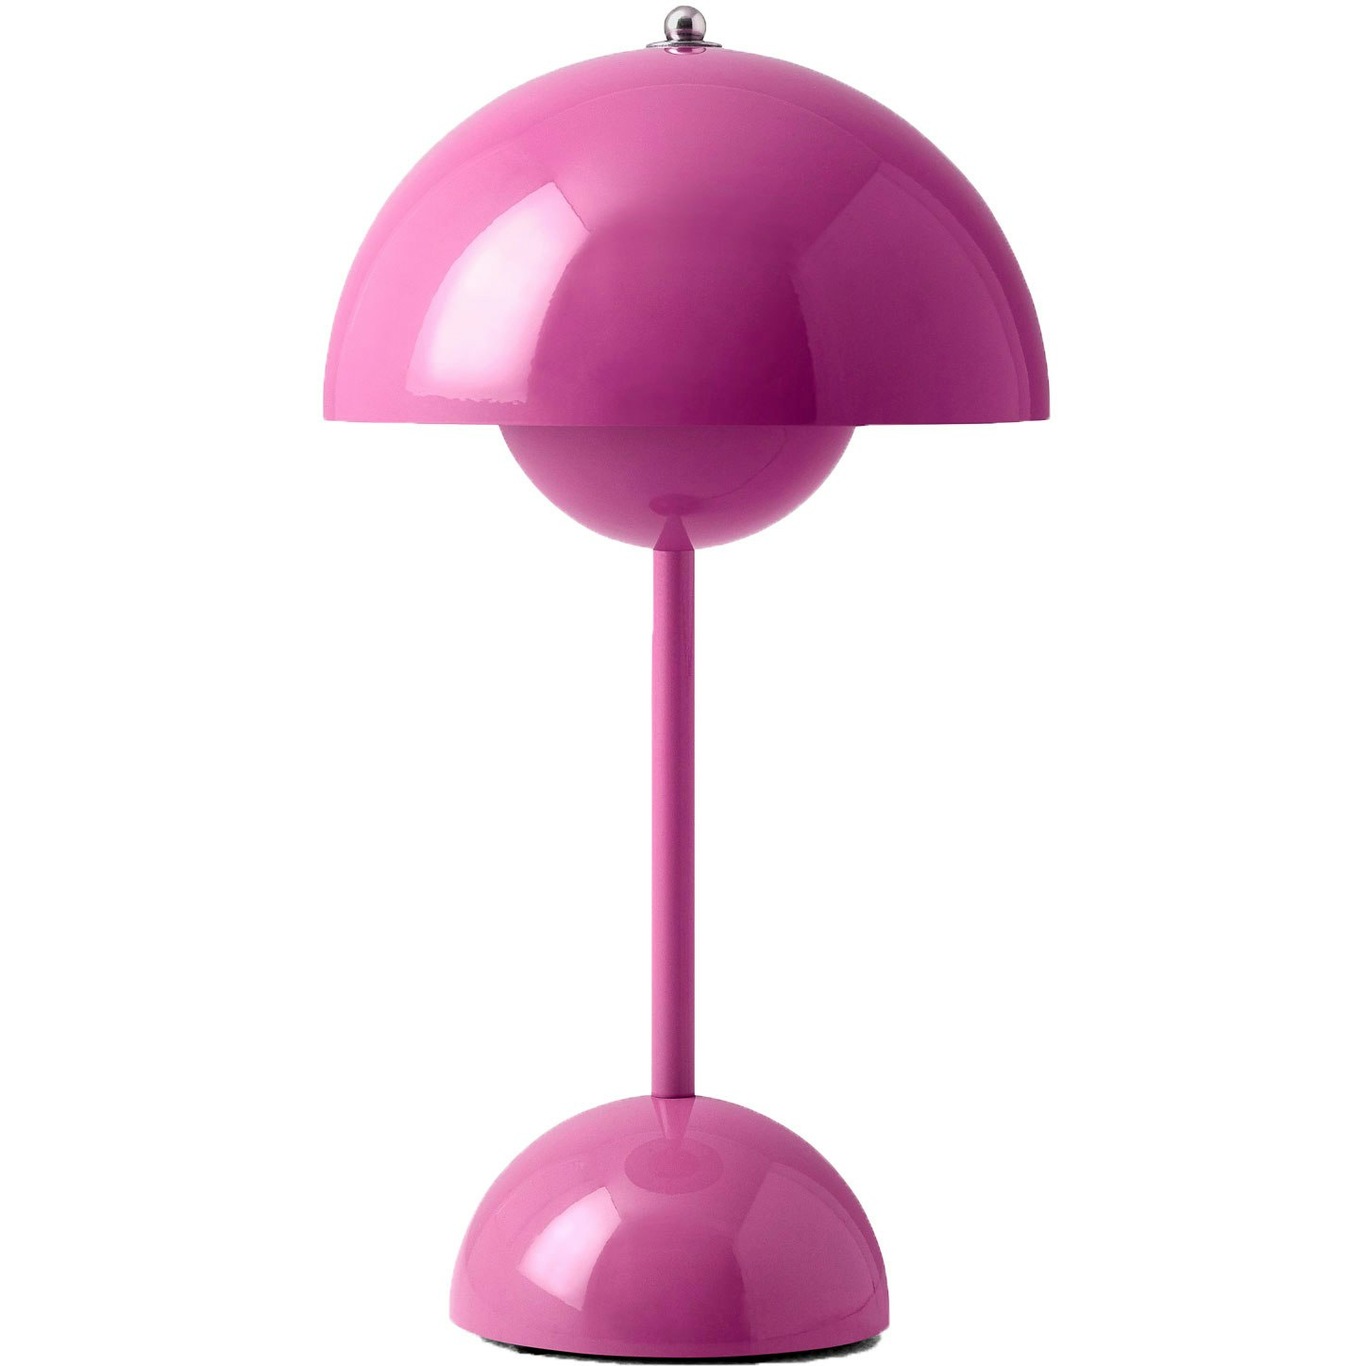 Flowerpot VP9 Table Lamp Portable, Tangy Pink